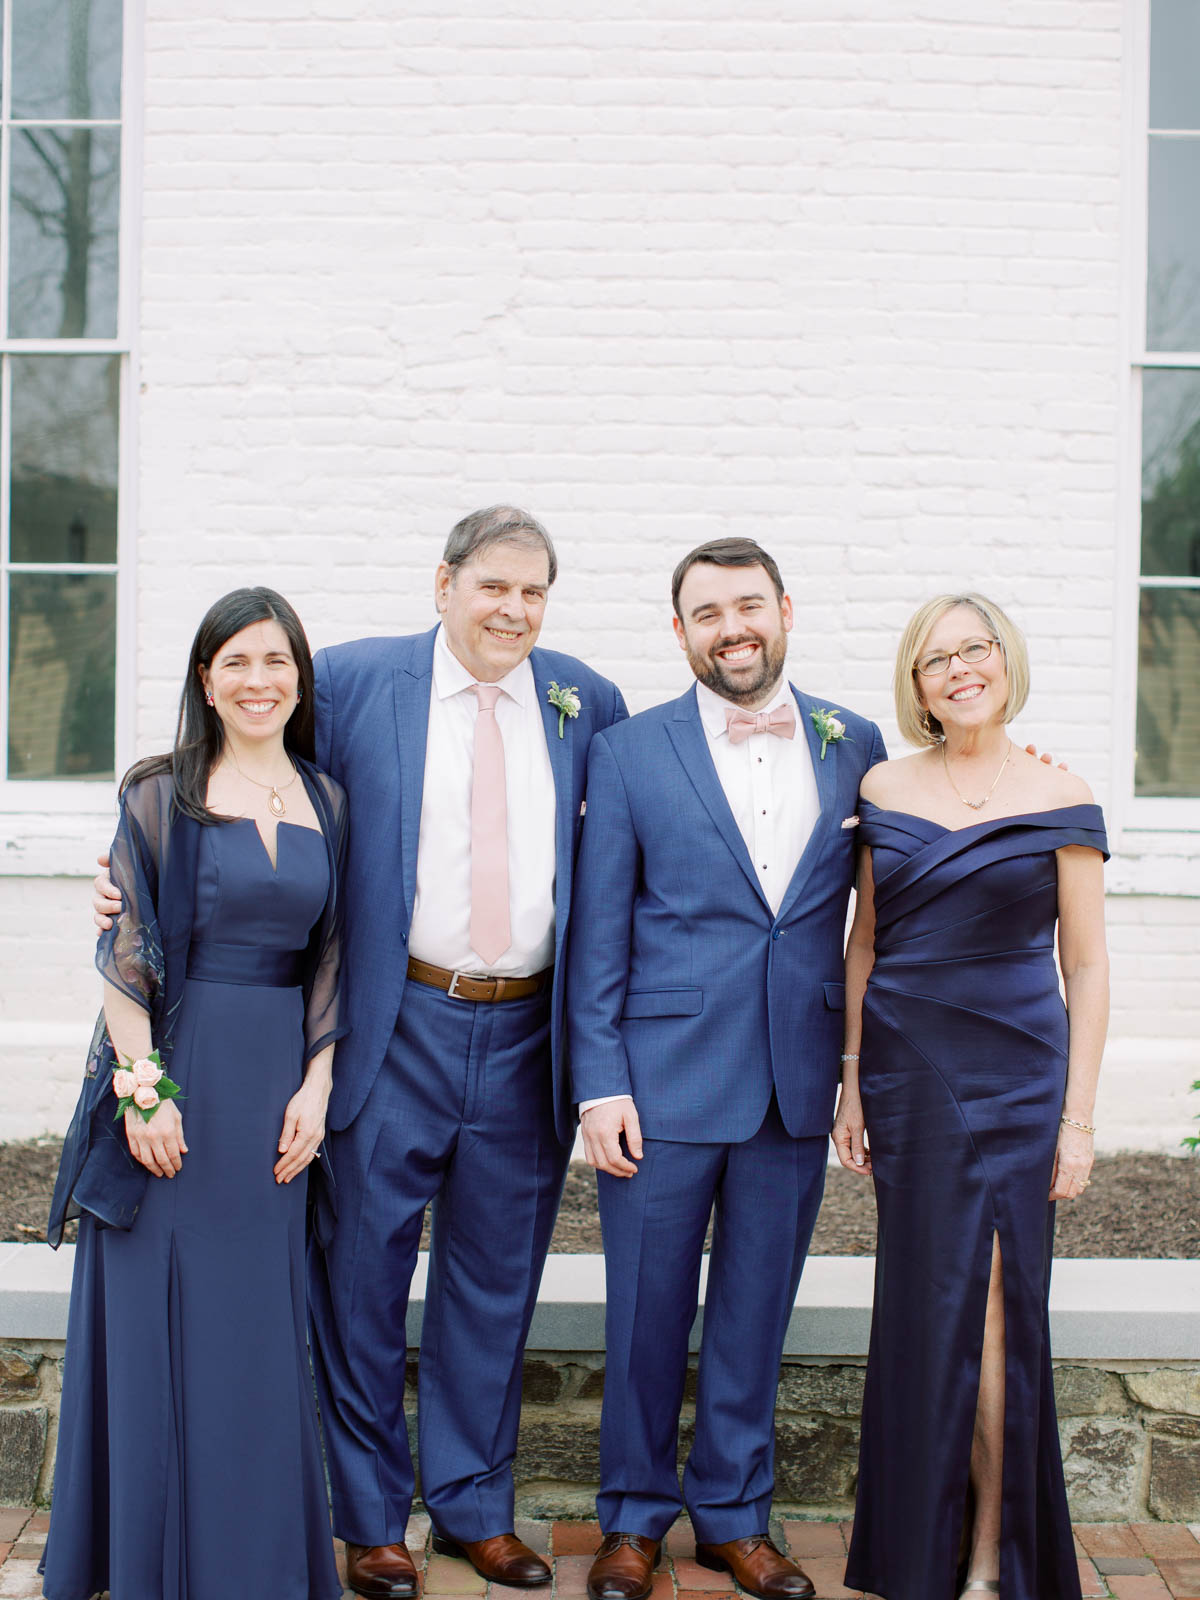 Groom's family dressed in navy blue for wedding ceremony in Georgetown, DC